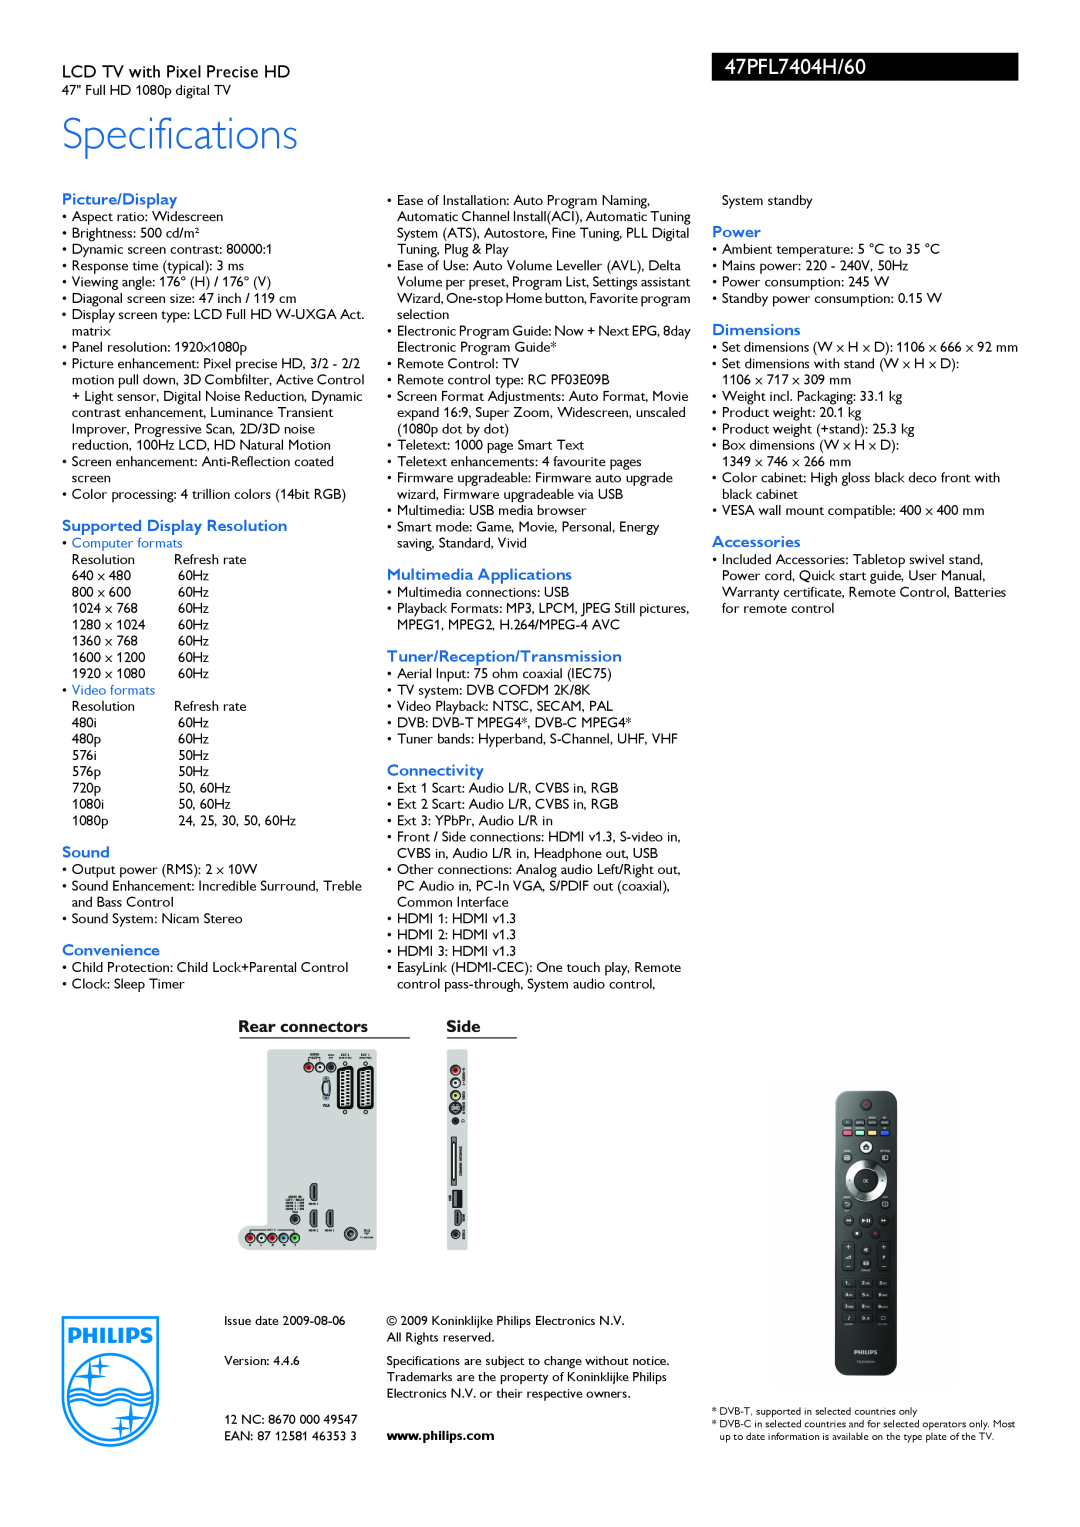 Philips 47PFL7404H Specifications, Picture/Display, Supported Display Resolution, Sound, Convenience, Connectivity, Power 